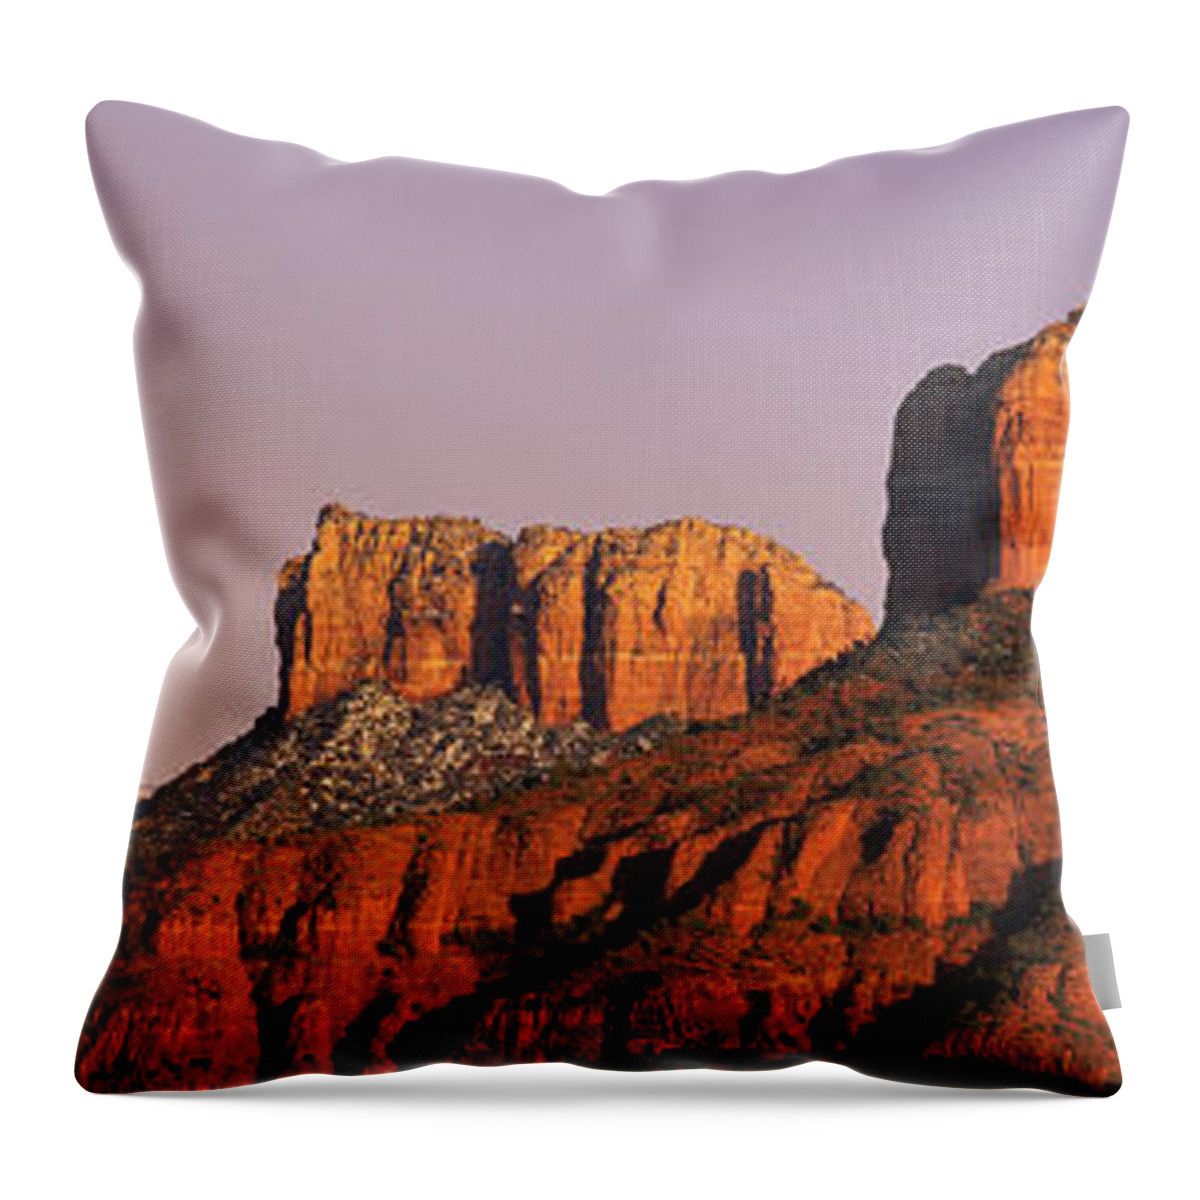 Scenics Throw Pillow featuring the photograph Rock Formations At Dawn by Visionsofamerica/joe Sohm